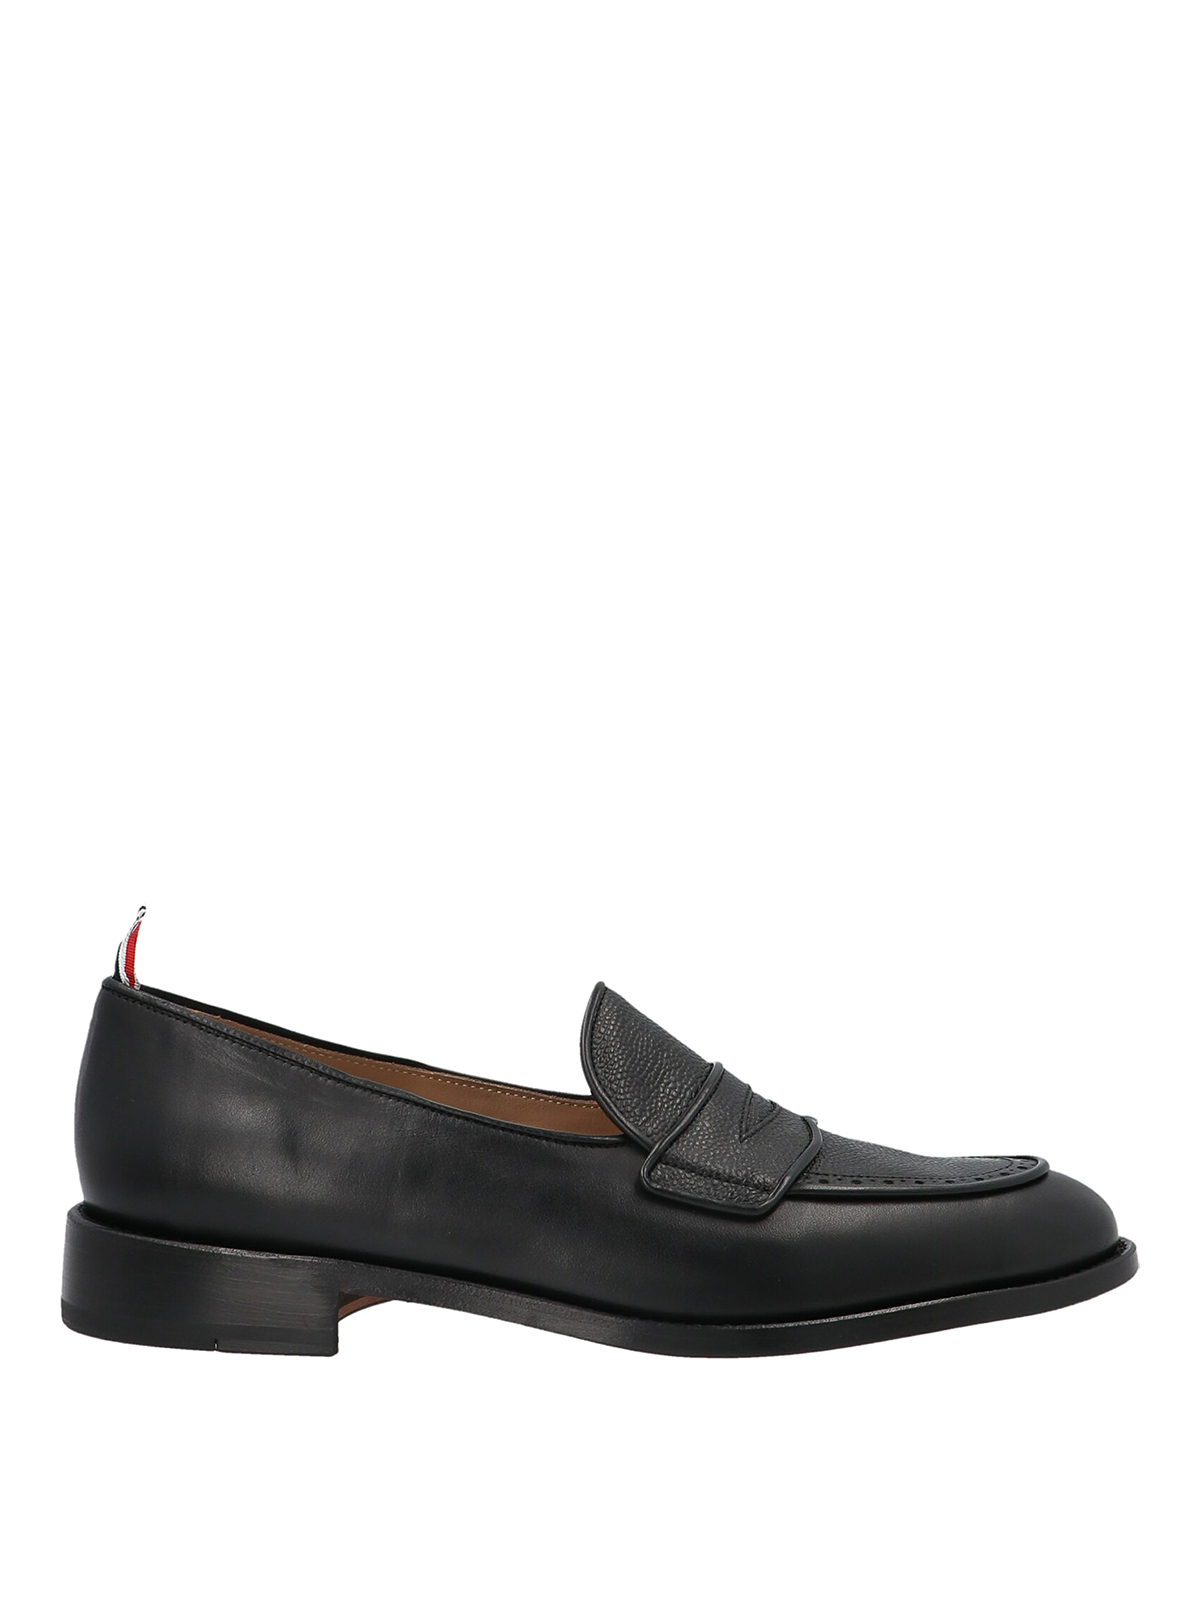 Thom Browne Leather Loafers In Black